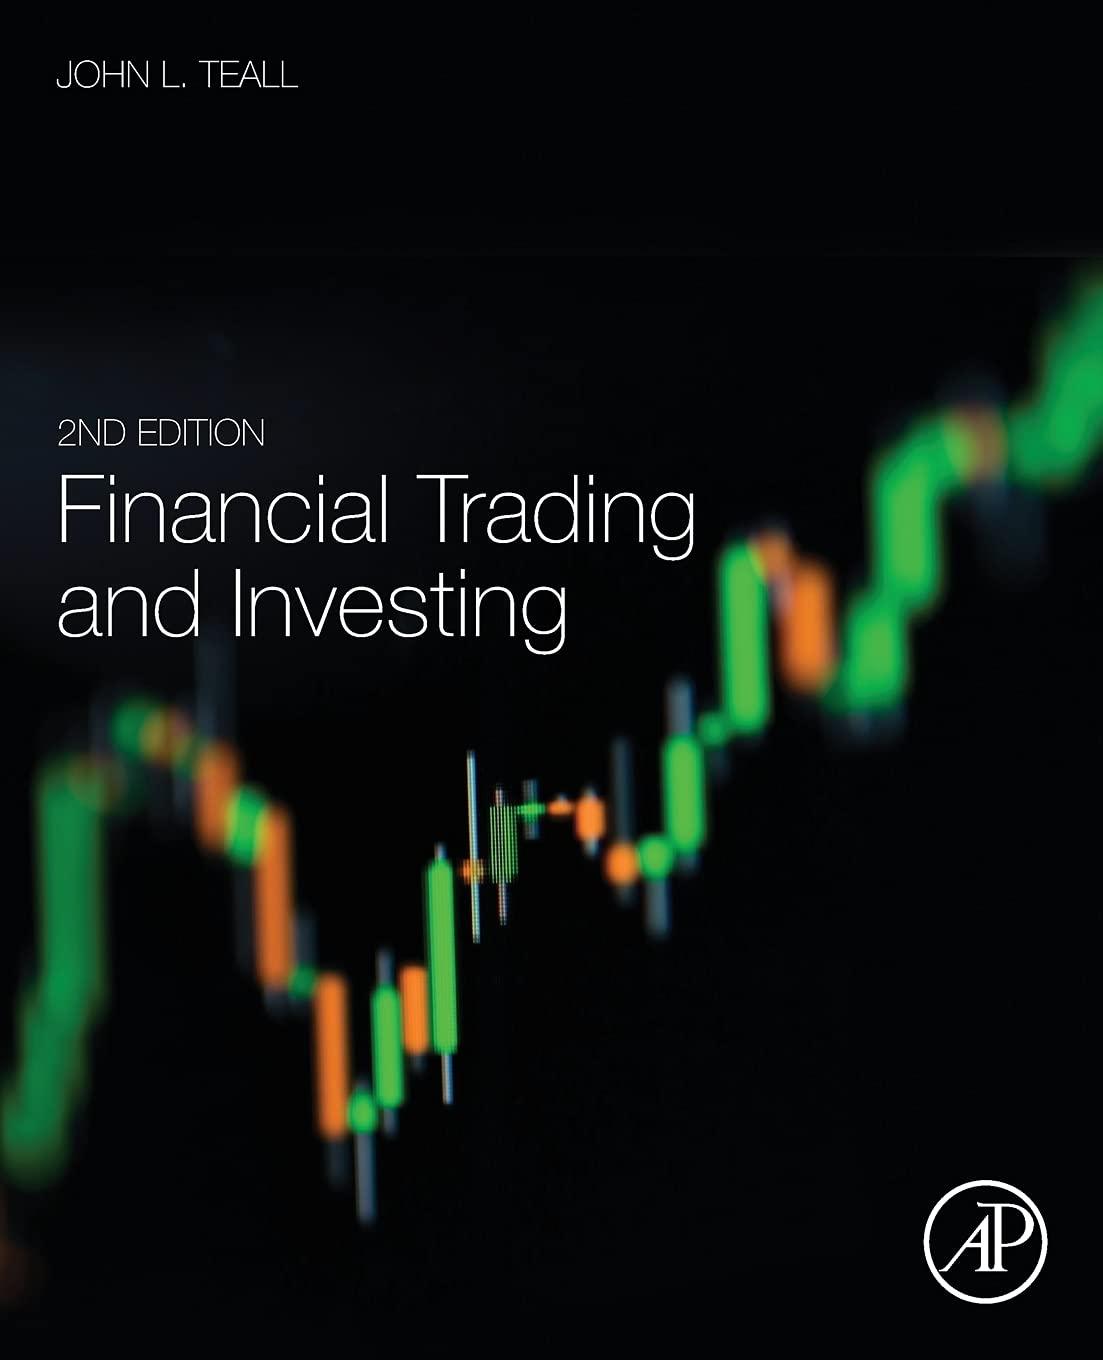 financial trading and investing 2nd edition john teall 012811116x, 978-0128111161